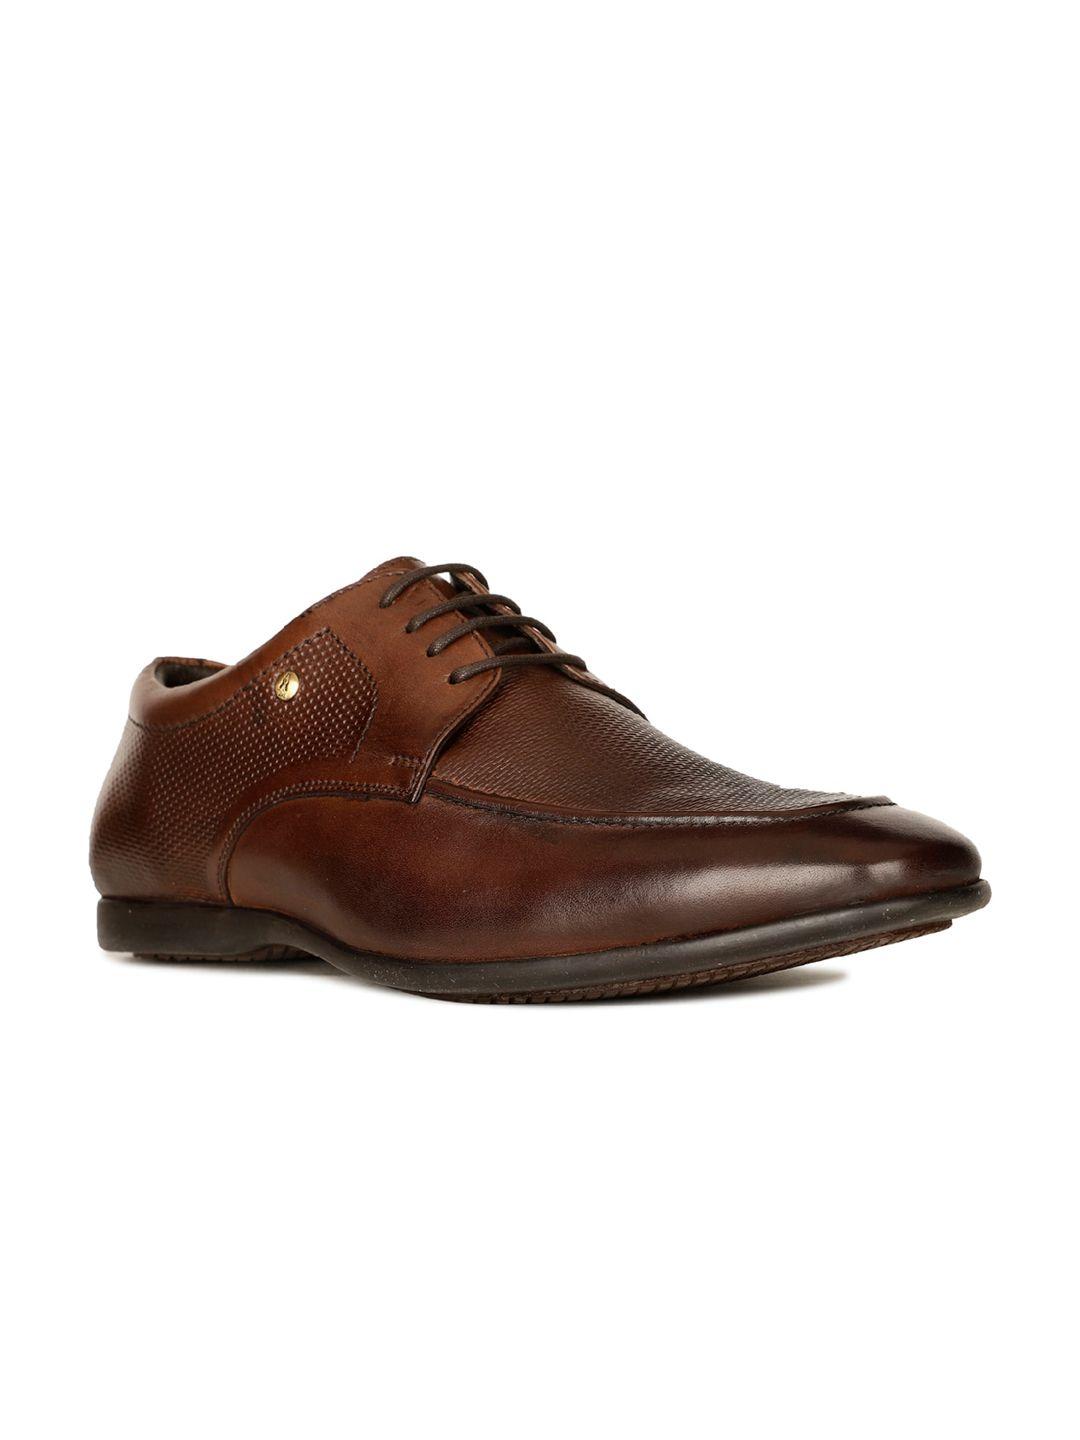 hush-puppies-men-textured-leather-derbys-formal-shoes